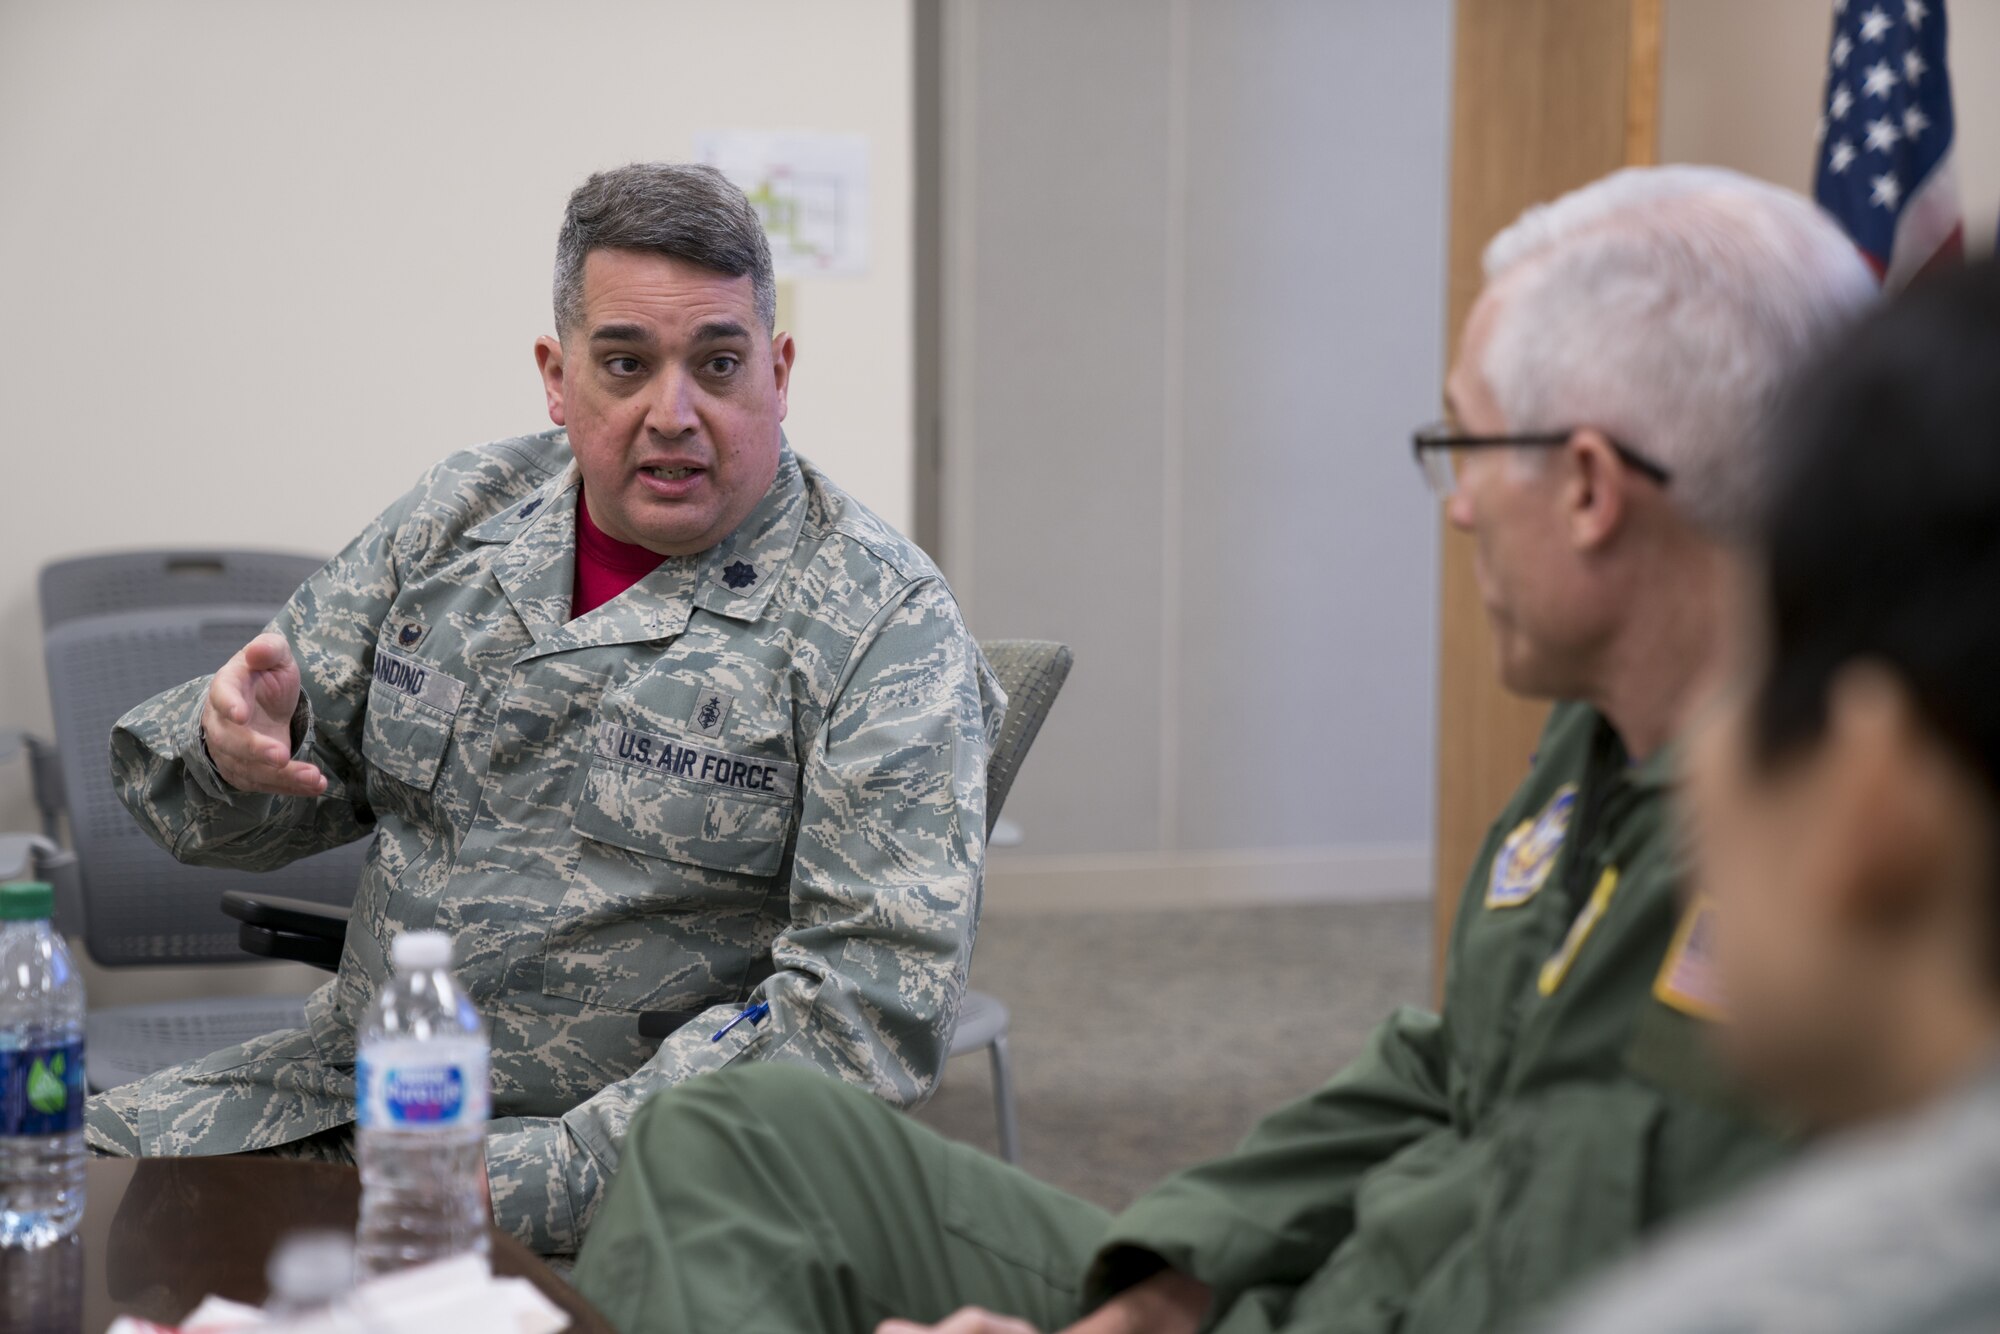 Lt. Col. Rafael Andino, 413th Aeromedical Staging Squadron commander, speaks to Maj. Gen. Craig La Fave, 22nd Air Force commander, and Chief Master Sgt. Imelda Johnson, 22nd AF command chief, Feb. 2, 2018, at Robins Air Force Base, Georgia. La Fave and Johnson had lunch with members of the unit and gave them opportunities to ask questions and discuss concerns. (U.S. Air Force photo by Jamal D. Sutter)